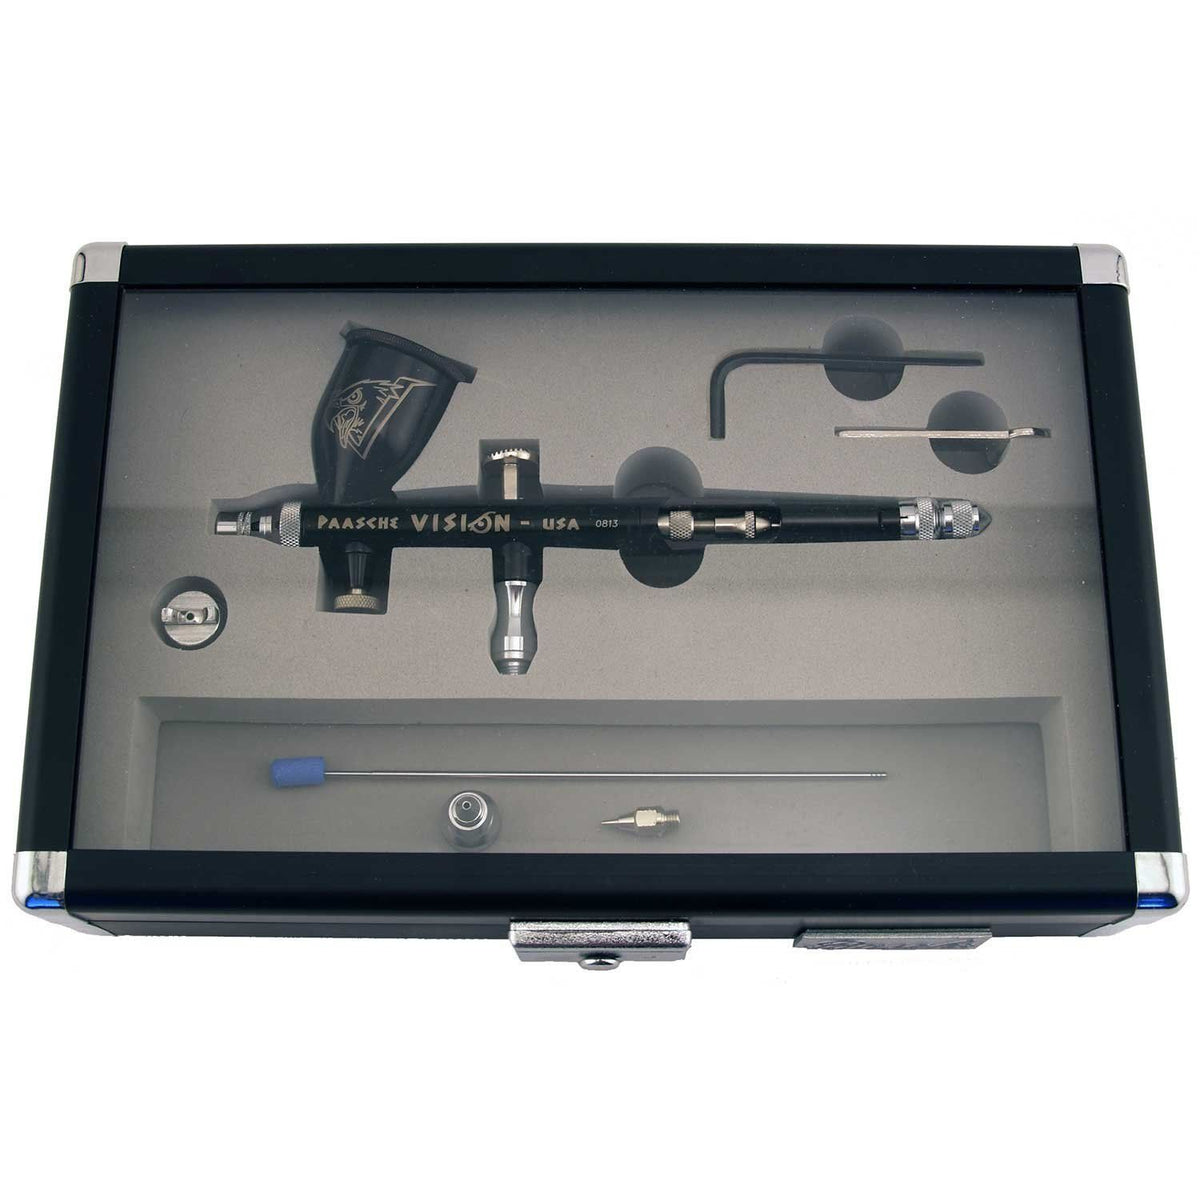 Paasche Airbrush Kit Contains 3 Different Airbrushes